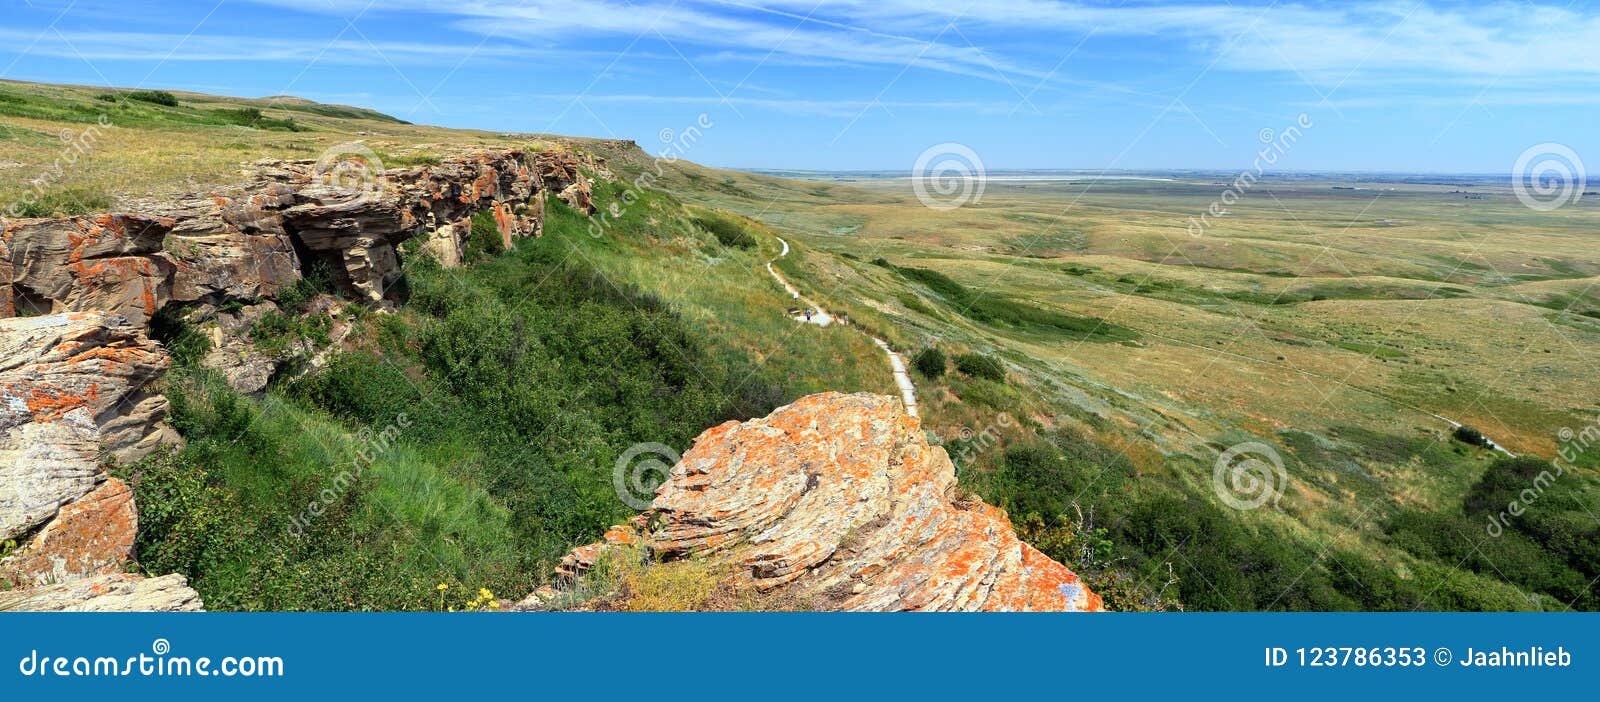 head smashed in buffalo jump unesco world hertiage site, panorama of cliffs and prairie landscape, alberta, canada